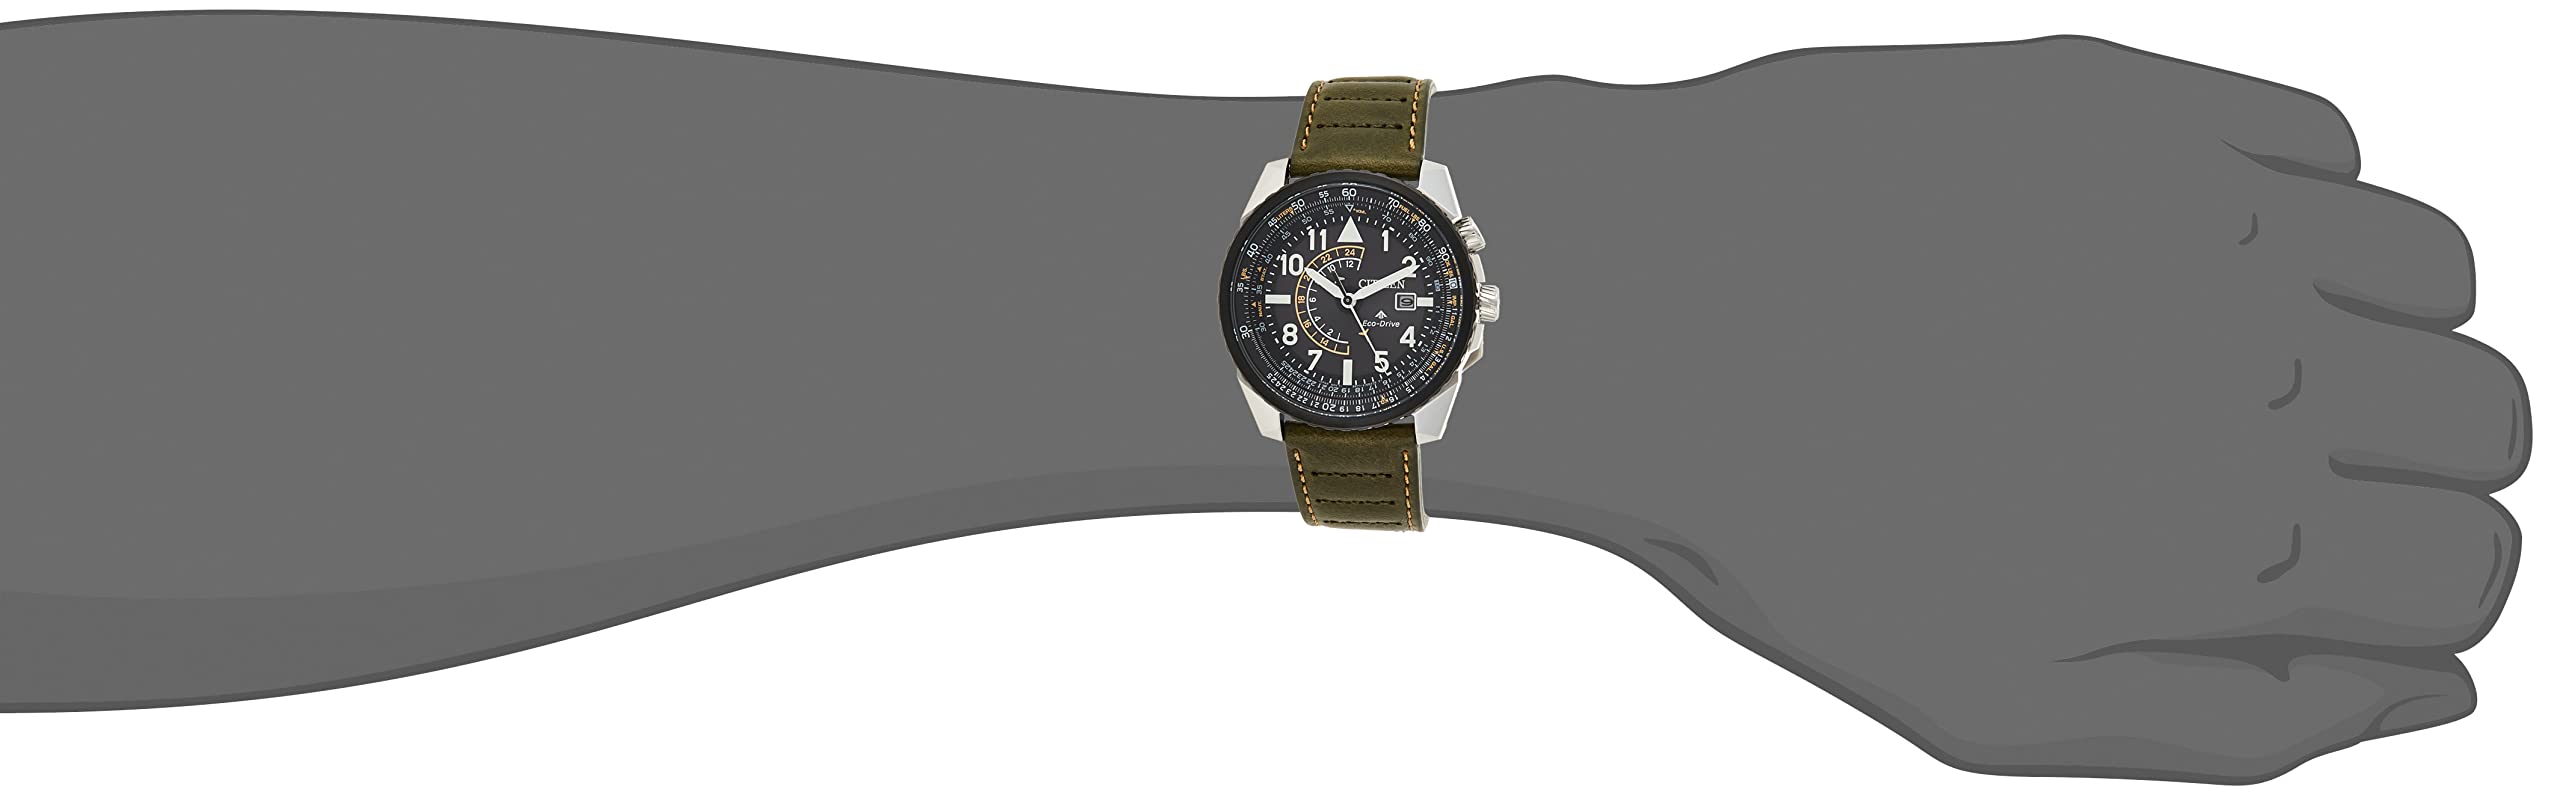 Citizen Men's Eco-Drive Promaster Air Nighthawk Pilot Watch in Stainless Steel with Olive Green Leather Strap, Black Dial (Model: BJ7138-04E)